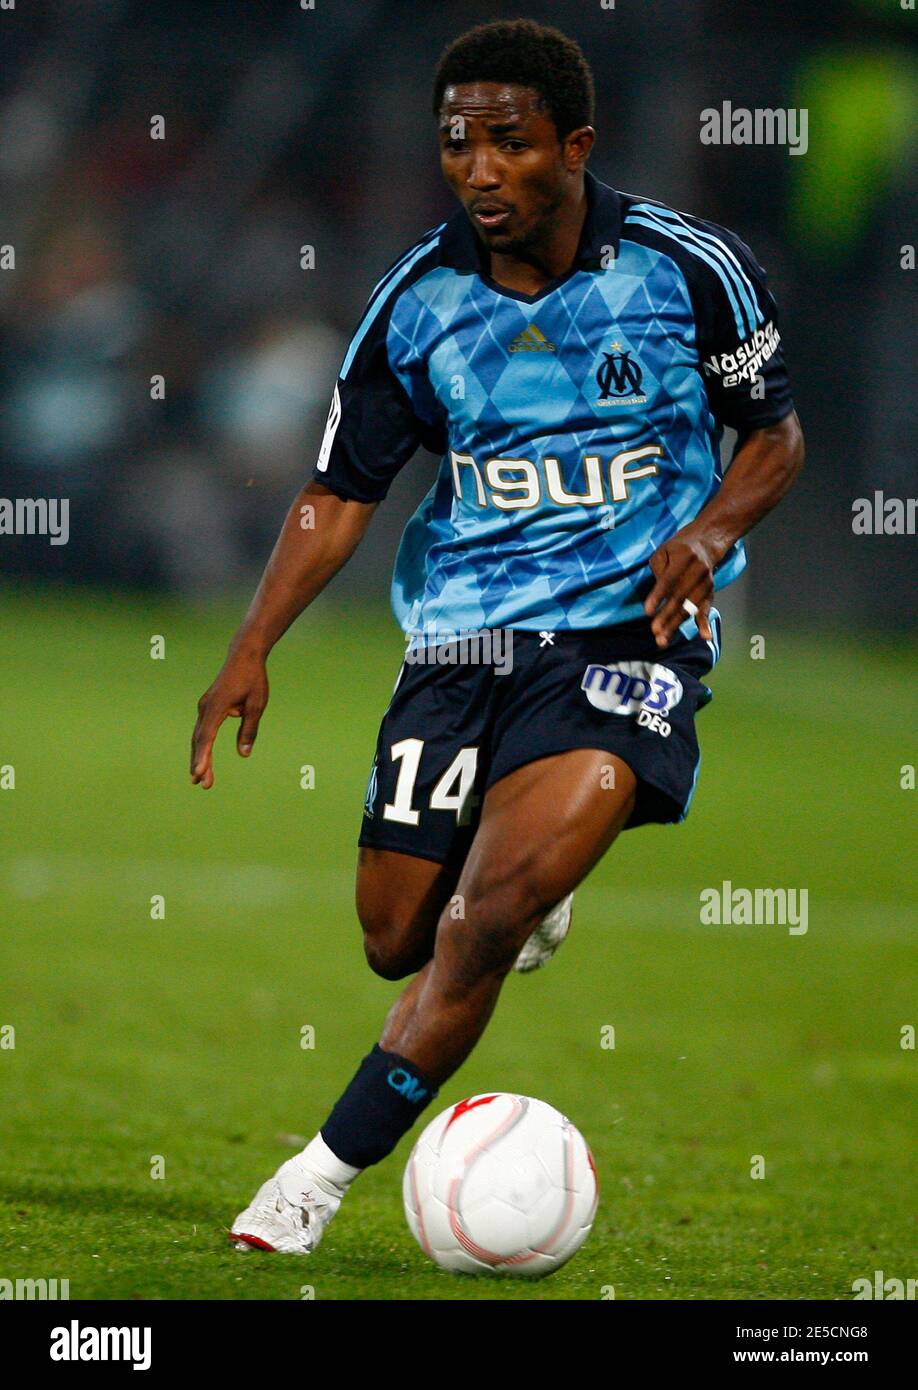 Marseille's Baky Kone during the French First league soccer match, Valenciennes vs Marseille at the Nungesser Stadium in Valenciennes, France on October 19, 2008. (Marseille won 3-1). Photo by Mikael LIbert/ABACAPRESS.COM Stock Photo